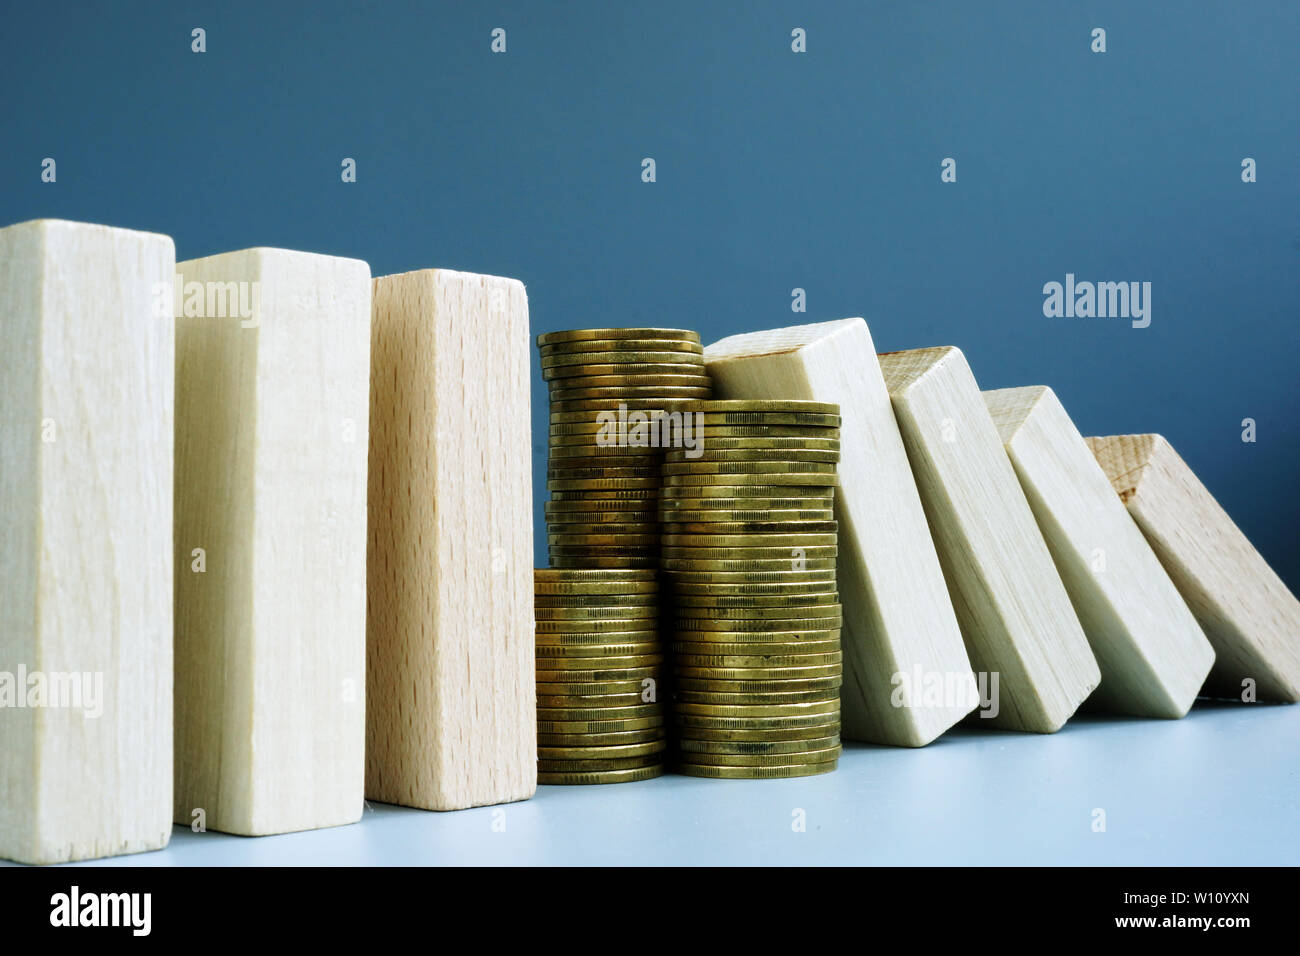 Financial stability concept. Stack of coins and domino effect. Stock Photo